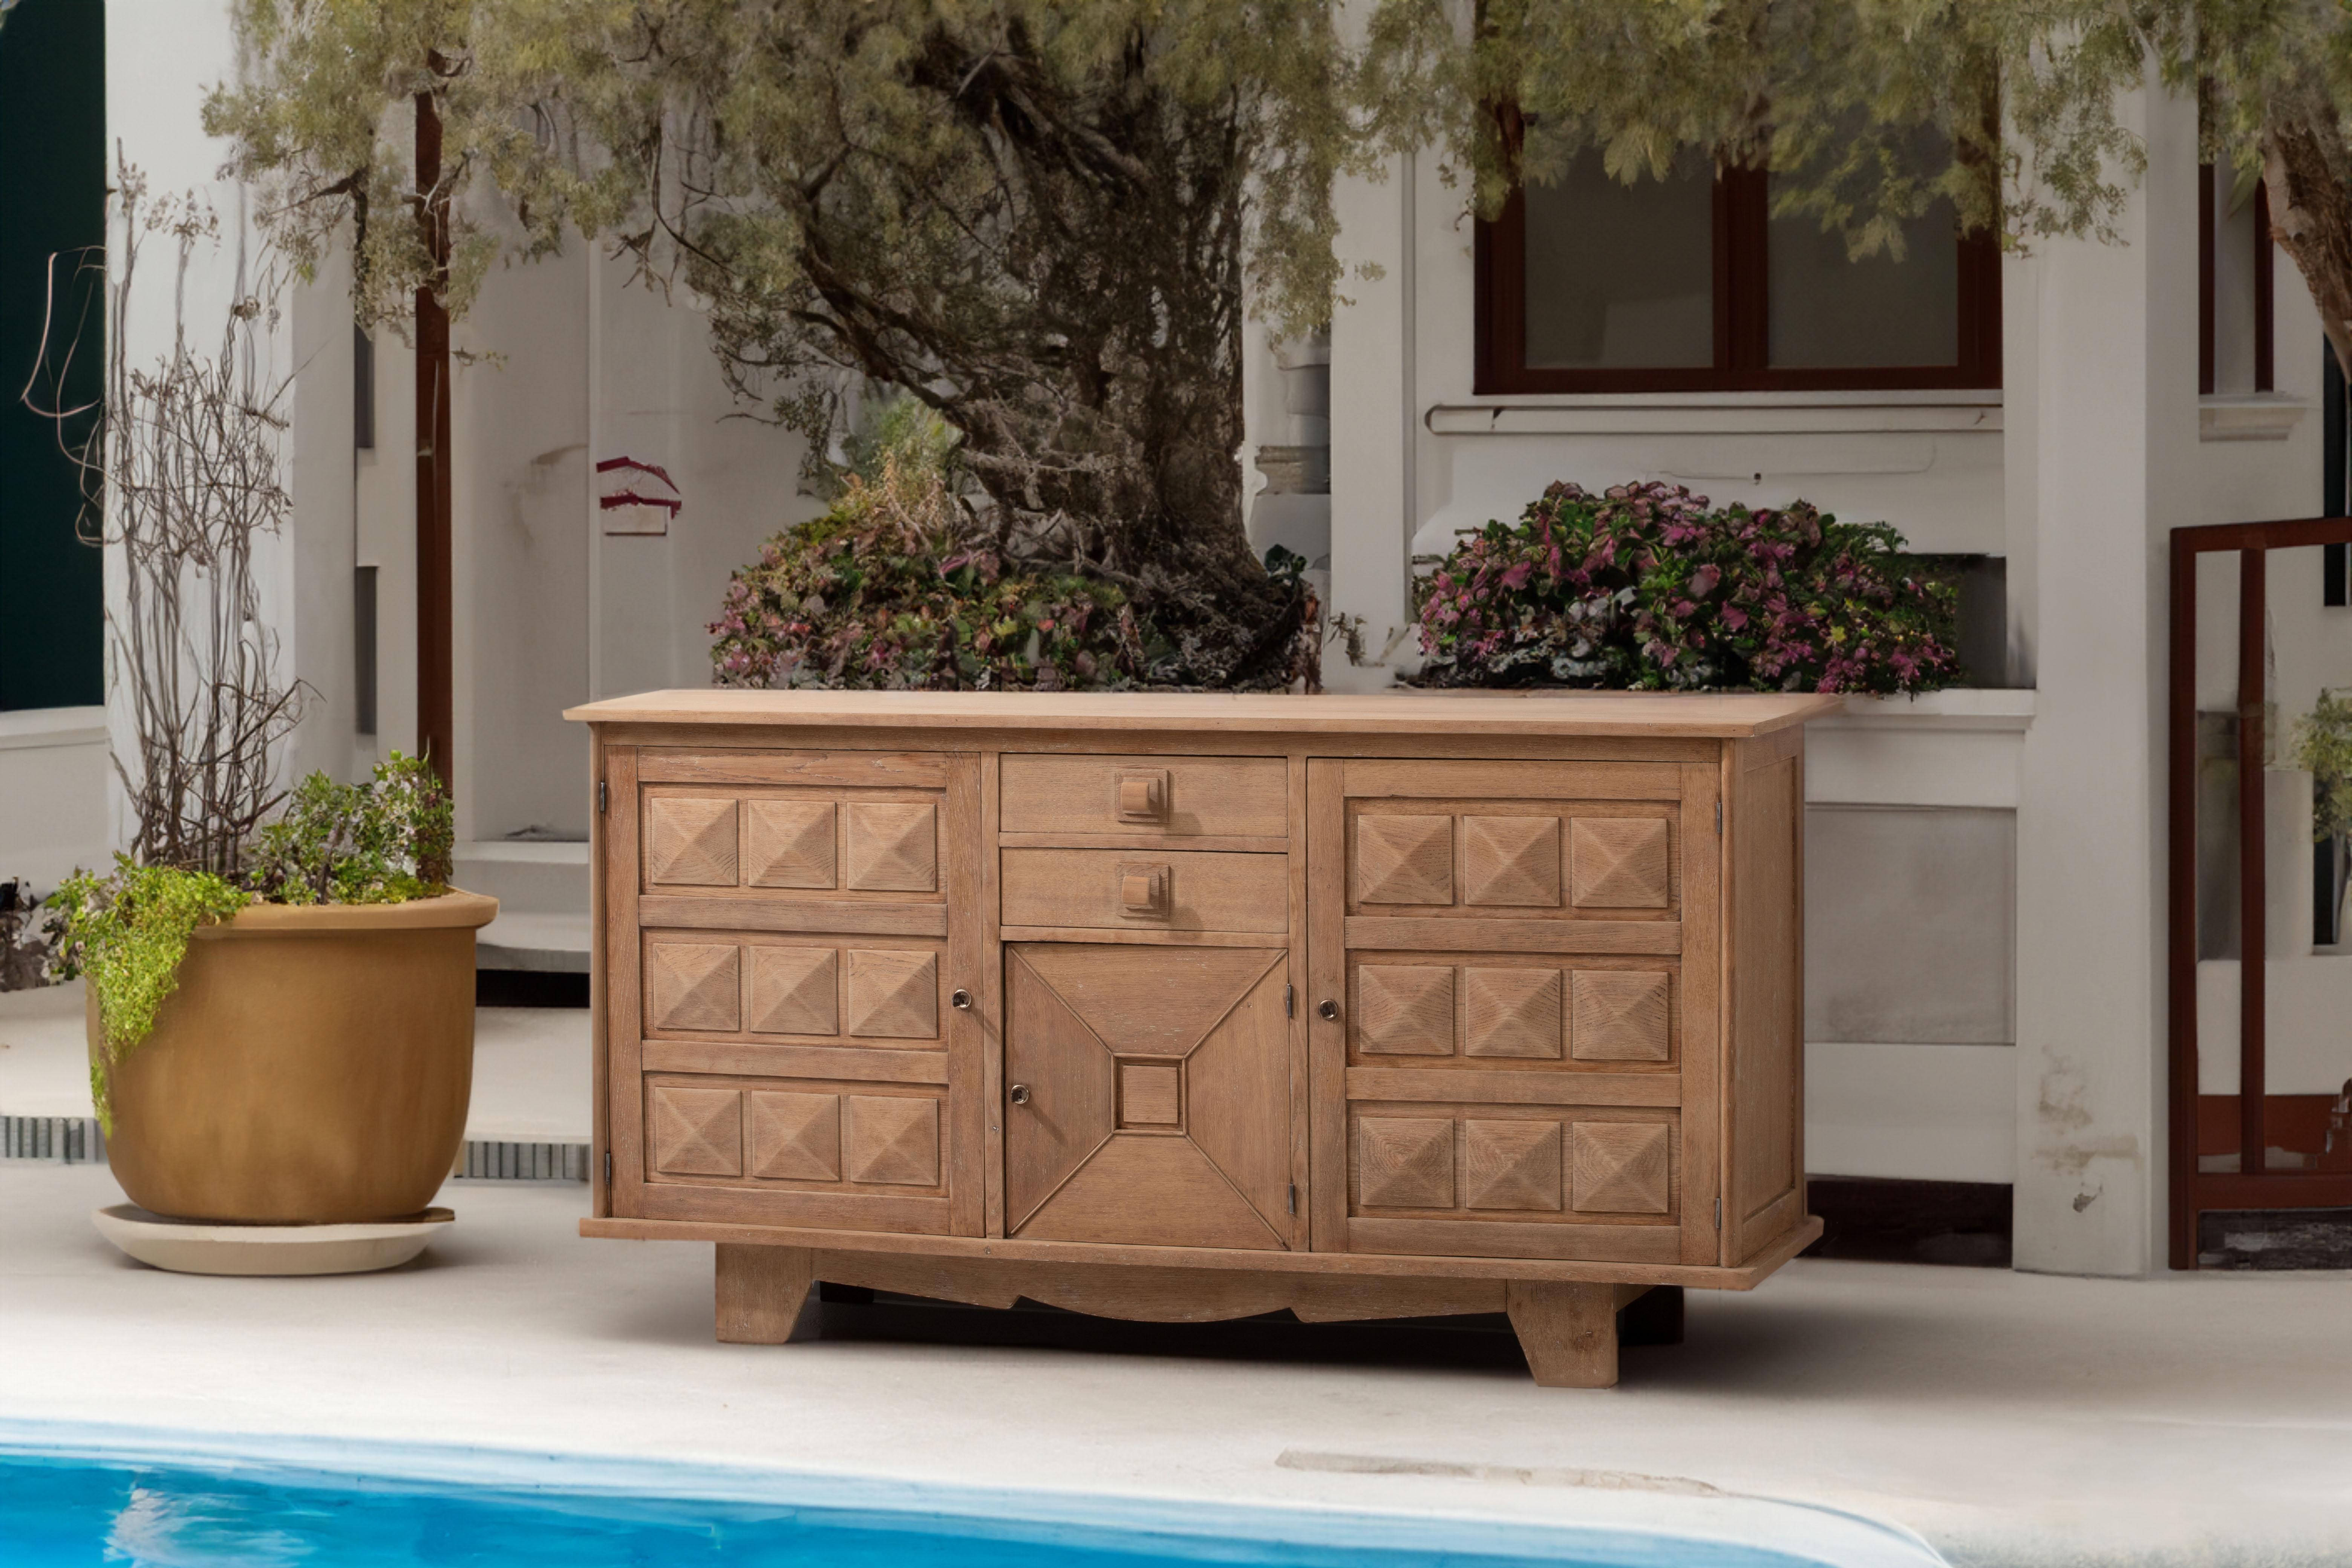 Introducing a captivating cerused credenza inspired by the esteemed French furniture designer, Charles Dudouyt. Renowned for his exceptional craftsmanship and innovative designs, Dudouyt seamlessly blended rustic elegance with modern